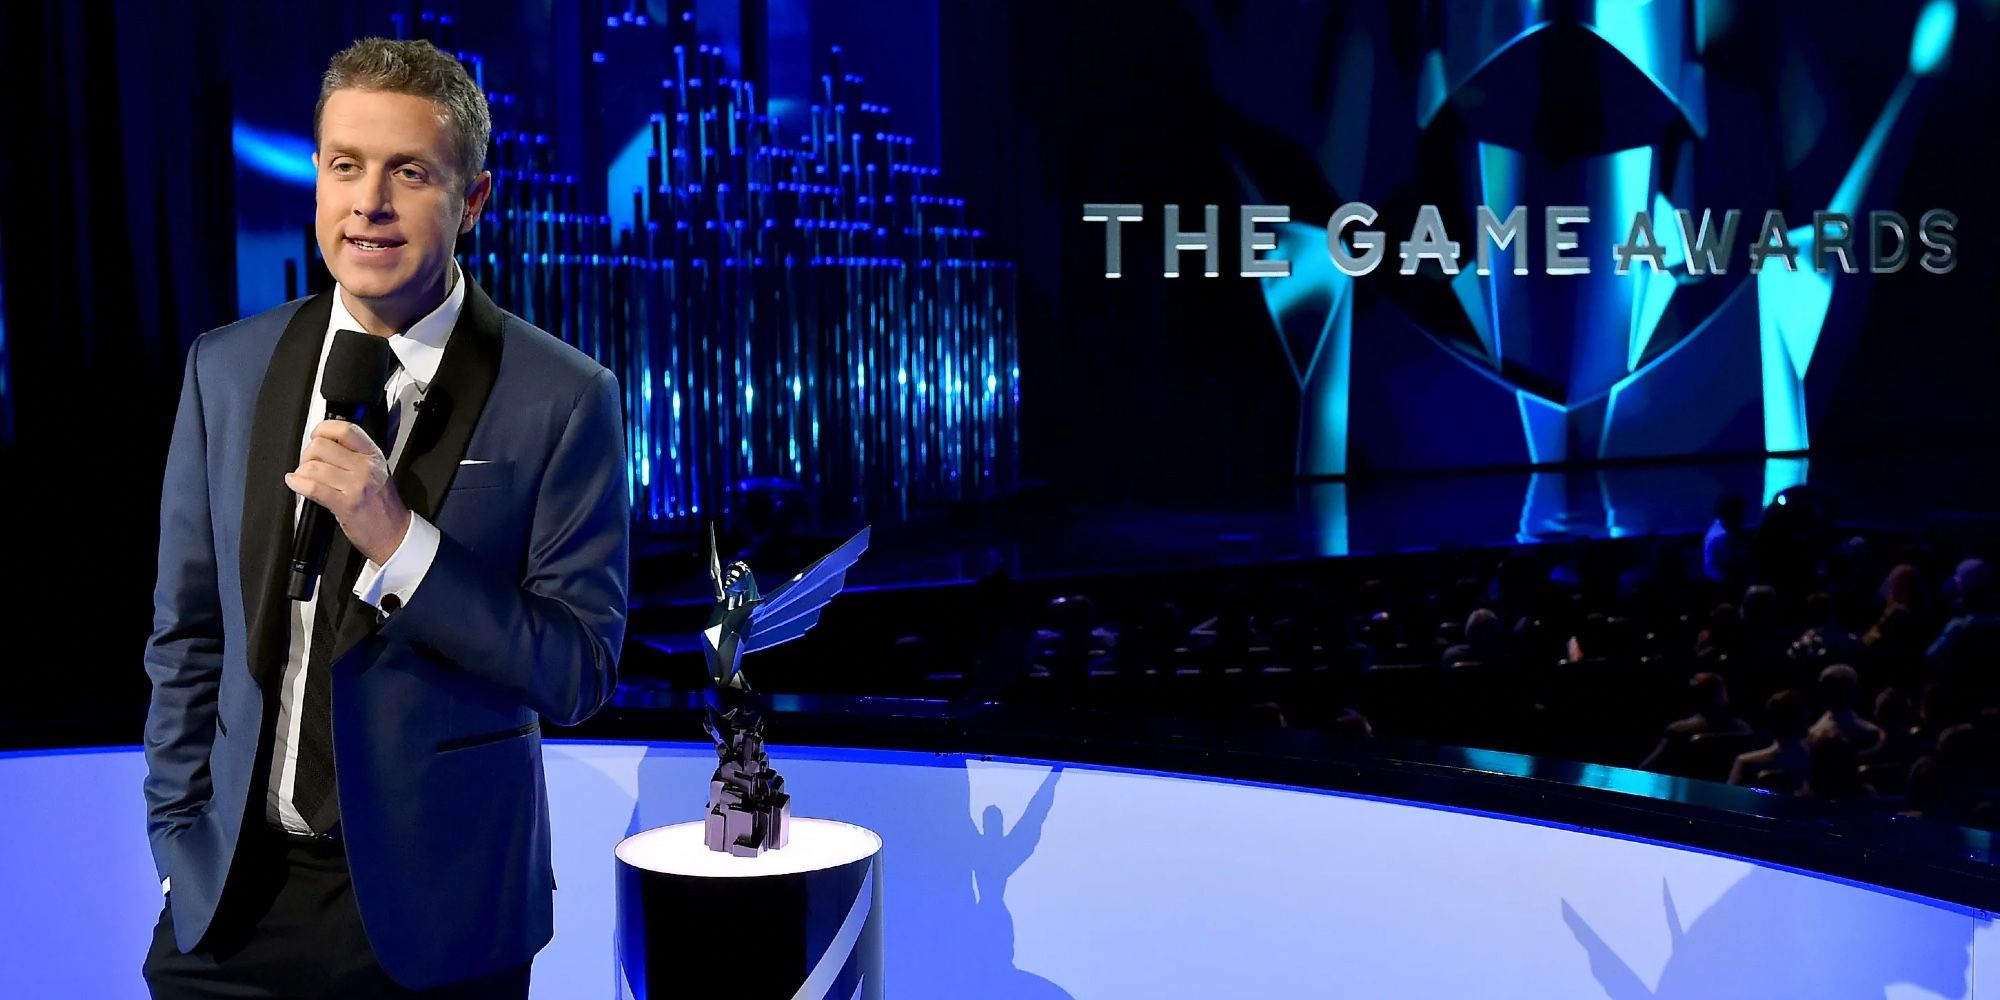 Good News: The Game Awards Is Not Doing NFTs